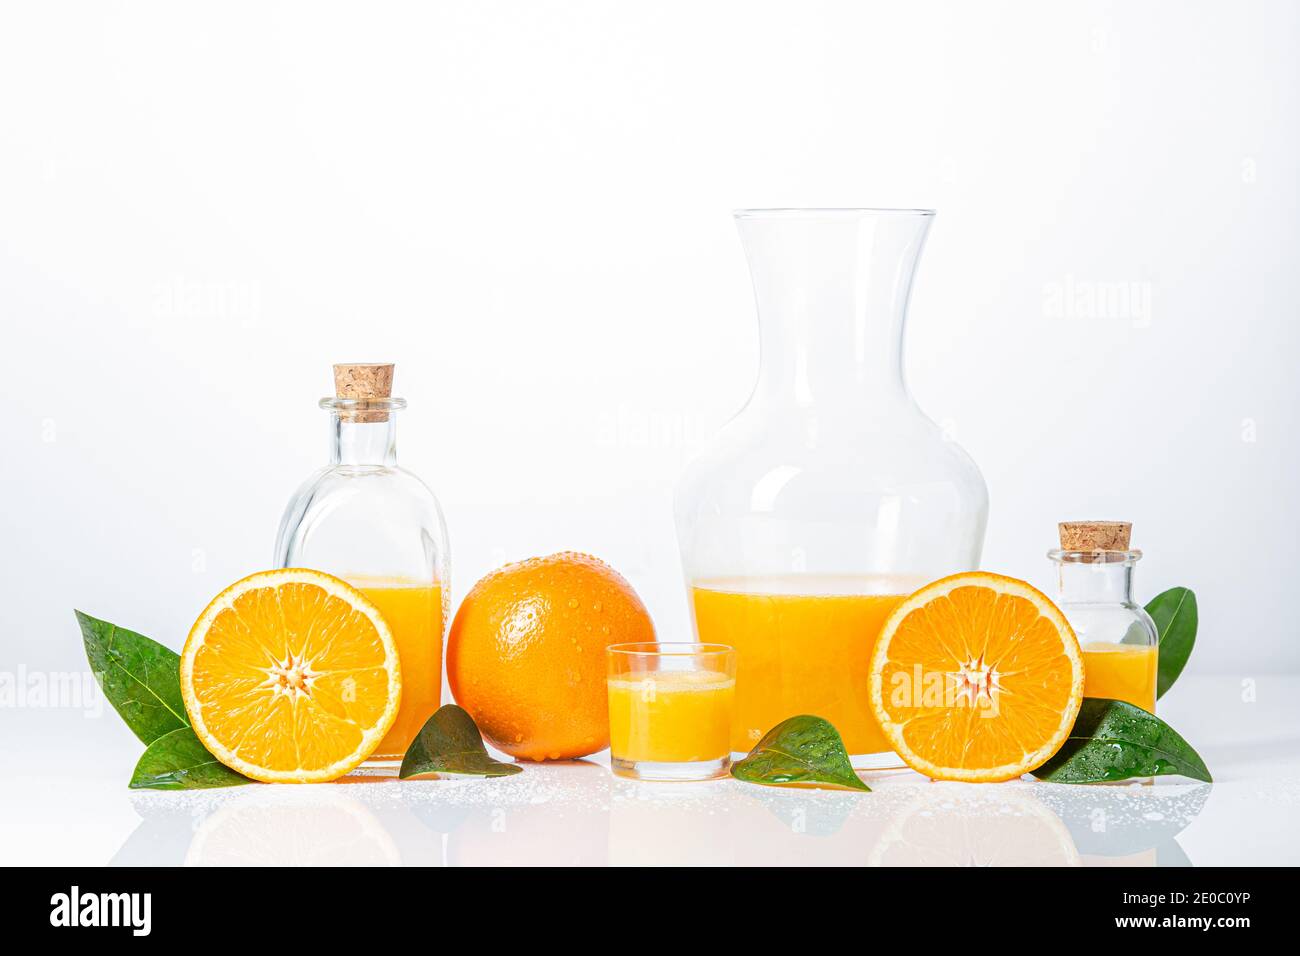 https://c8.alamy.com/comp/2E0C0YP/oranges-oranges-slices-orange-leaves-and-glass-containers-with-orange-juice-isolated-on-white-background-2E0C0YP.jpg